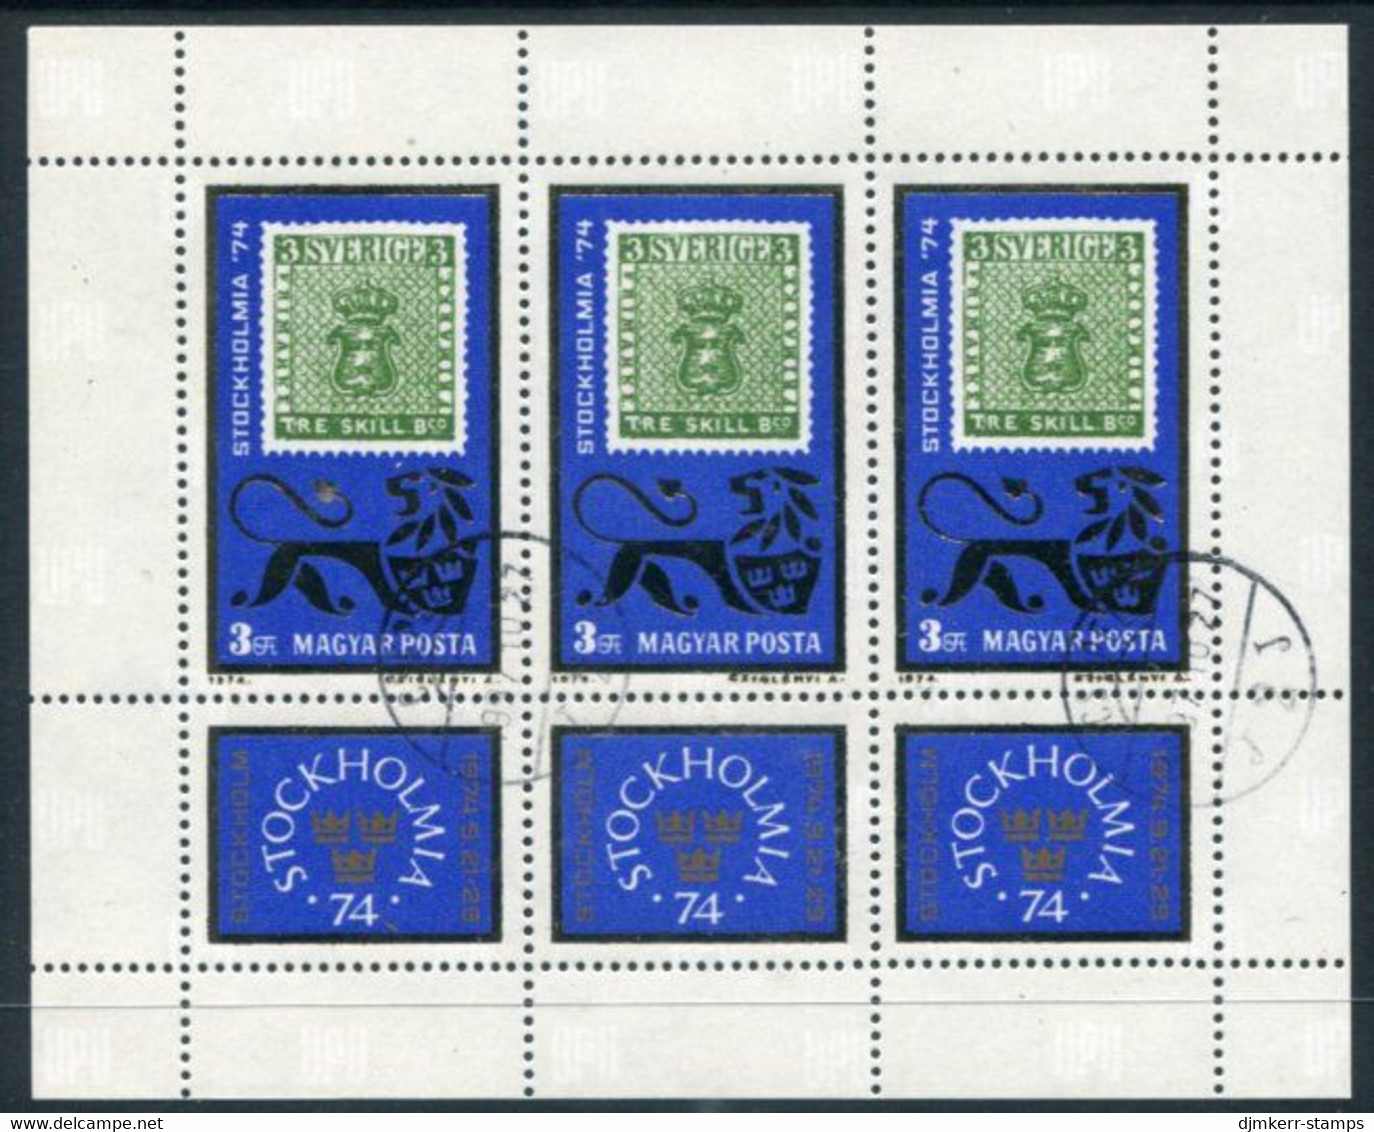 HUNGARY 1974 STOCKHOLMIA Stamp Exhibition Sheetlet Used.  Michel 2981 Kb - Gebraucht